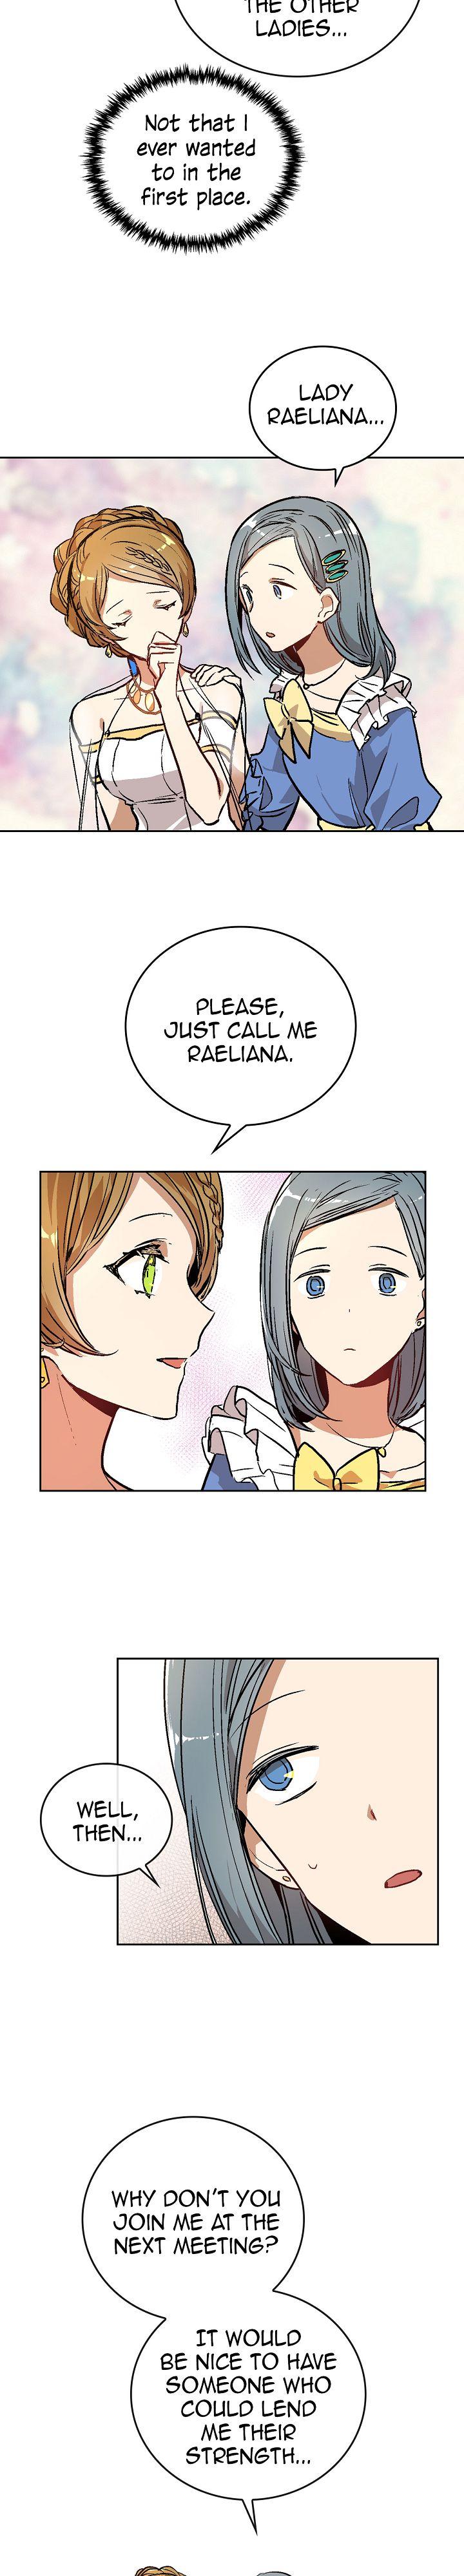 The Reason Why Raeliana Ended up at the Duke's Mansion - Chapter 18 Page 4